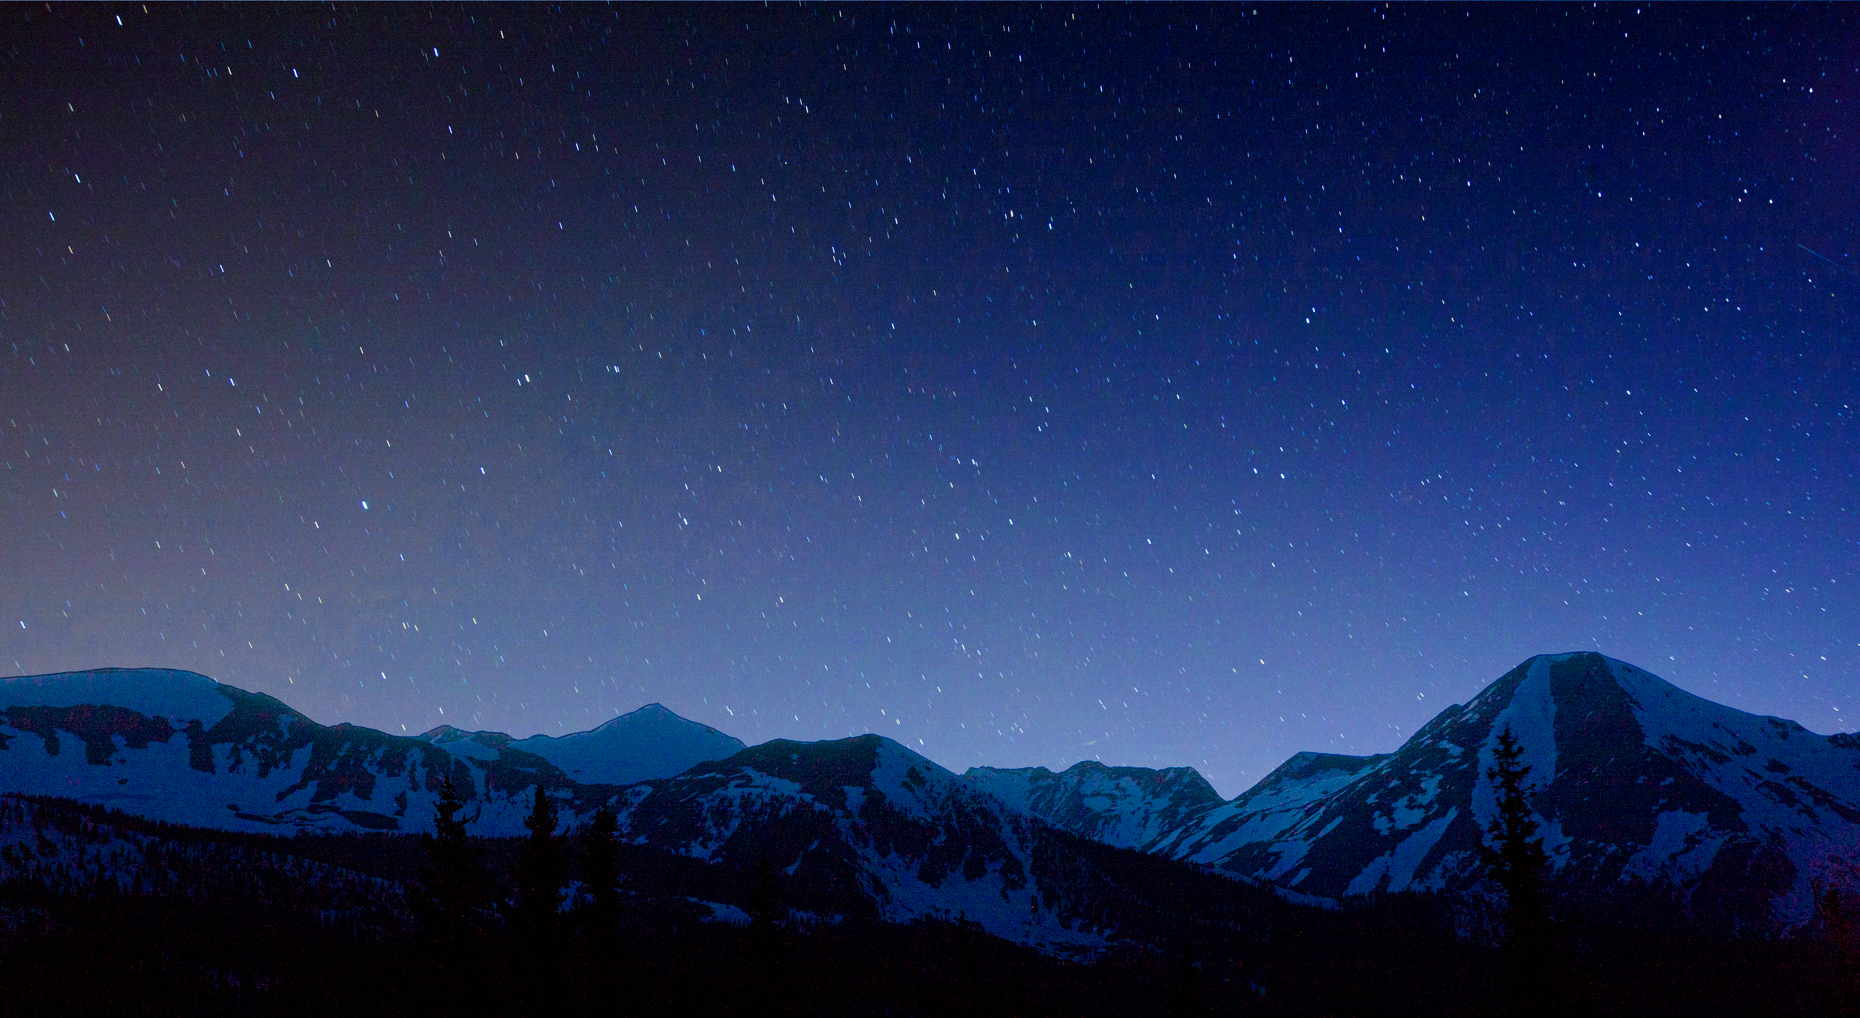 Star filled sky from Monarch Pass, Sawatch Range, Chaffee County, Colorado, USA